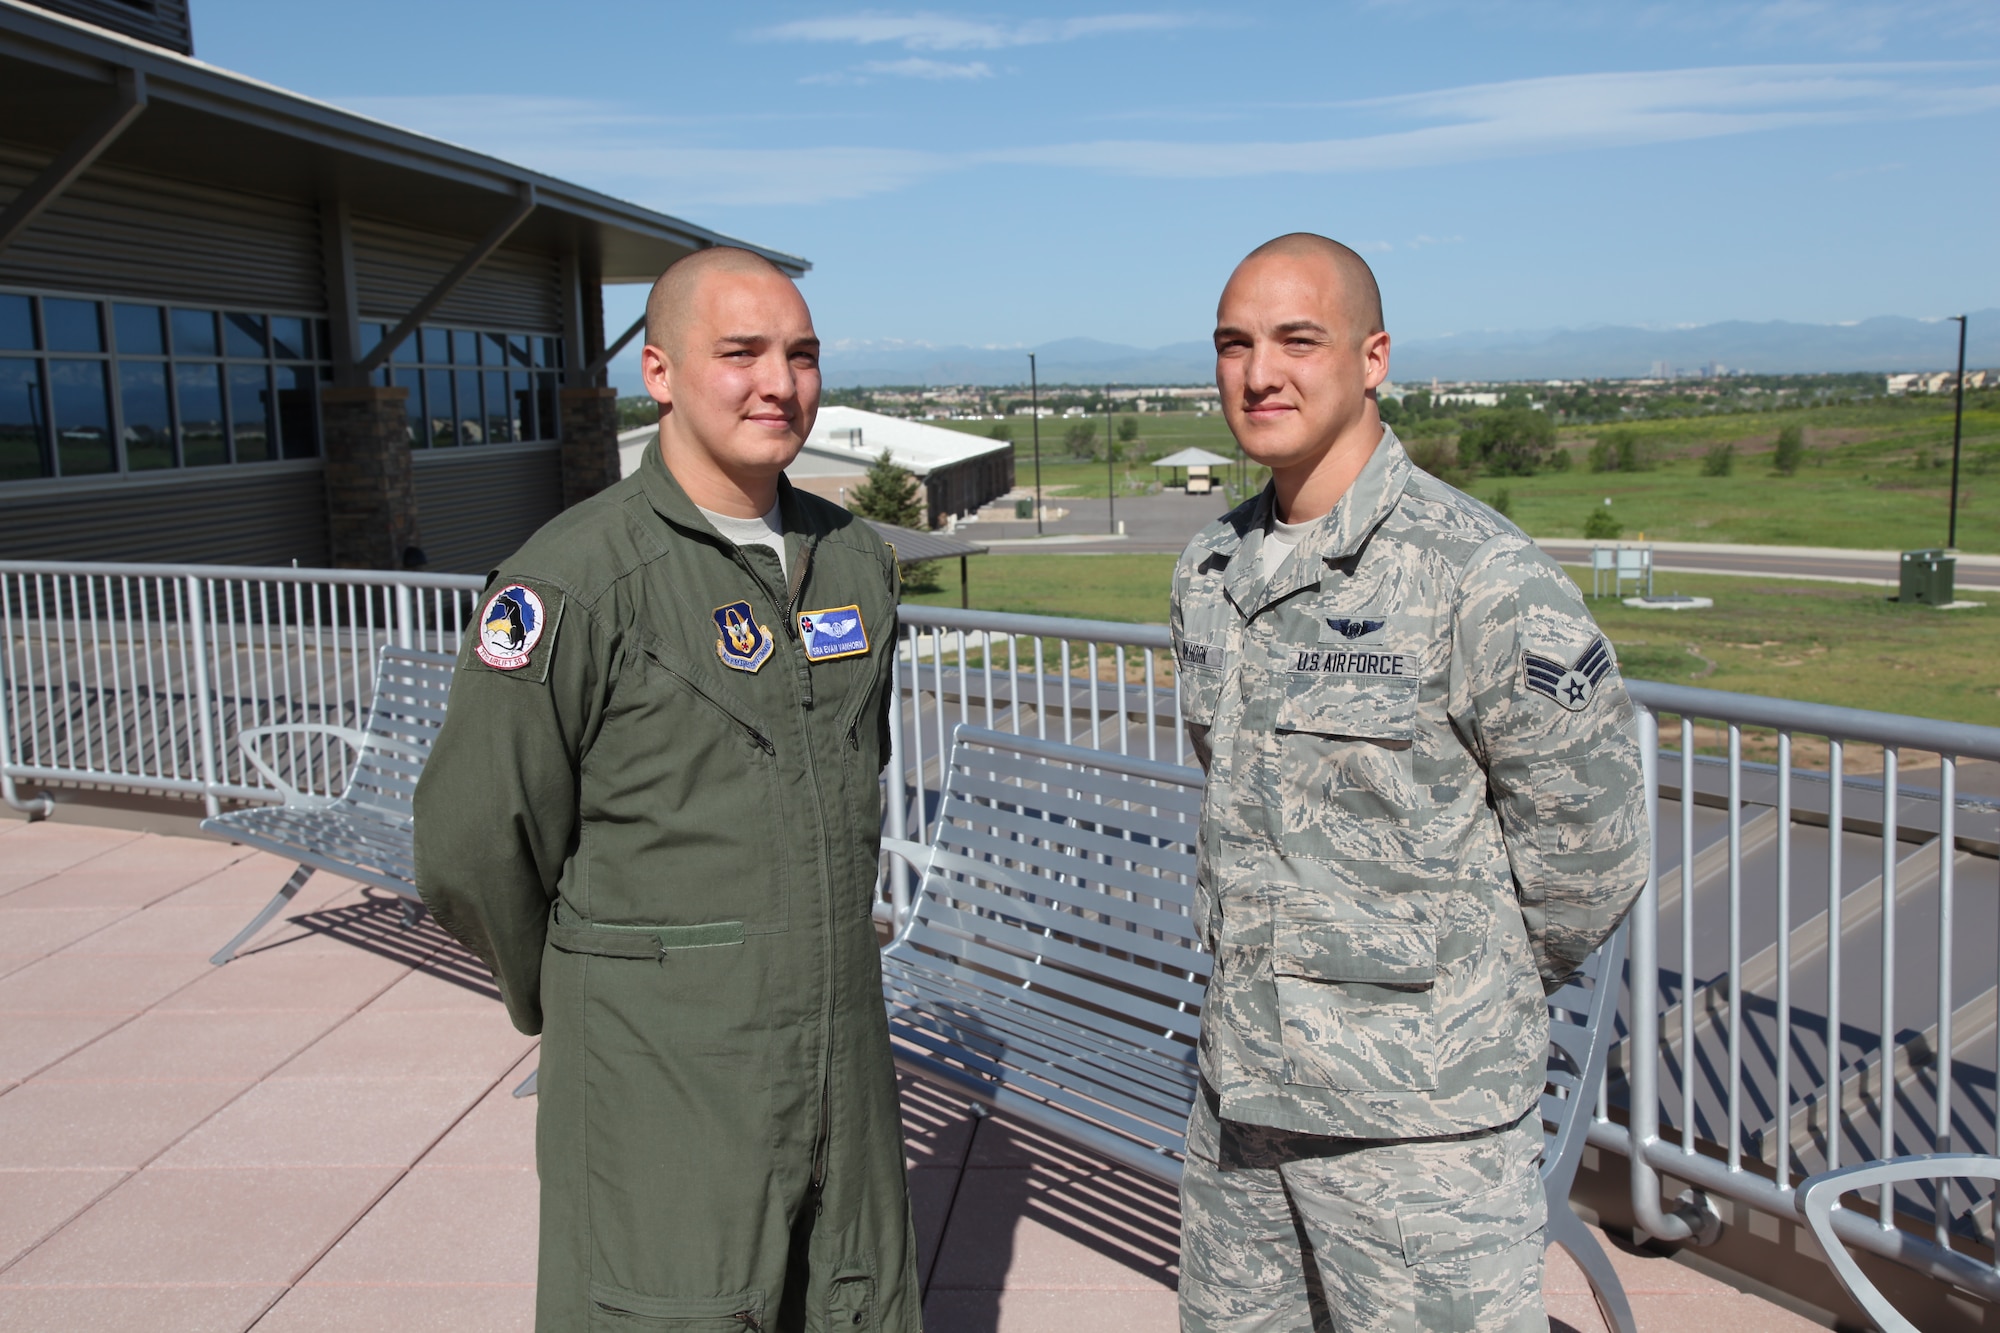 Senior Airmen Evan and Adam Van Horn stand outside the Air Reserve Personnel Center headquarters building June 17, 2014, on Buckley Air Force Base, Colo. Members at the Air Reserve Personnel Center have been seeing double since Senior Airmen Evan and Adam Van Horn were assigned here. Although the twins are fraternal, it’s difficult to tell them apart. Their journey began in May when Evan began working as a points management agent on Reserve Personnel Appropriation orders here. (U.S. Air Force photo/Tech. Sgt. Rob Hazelett)